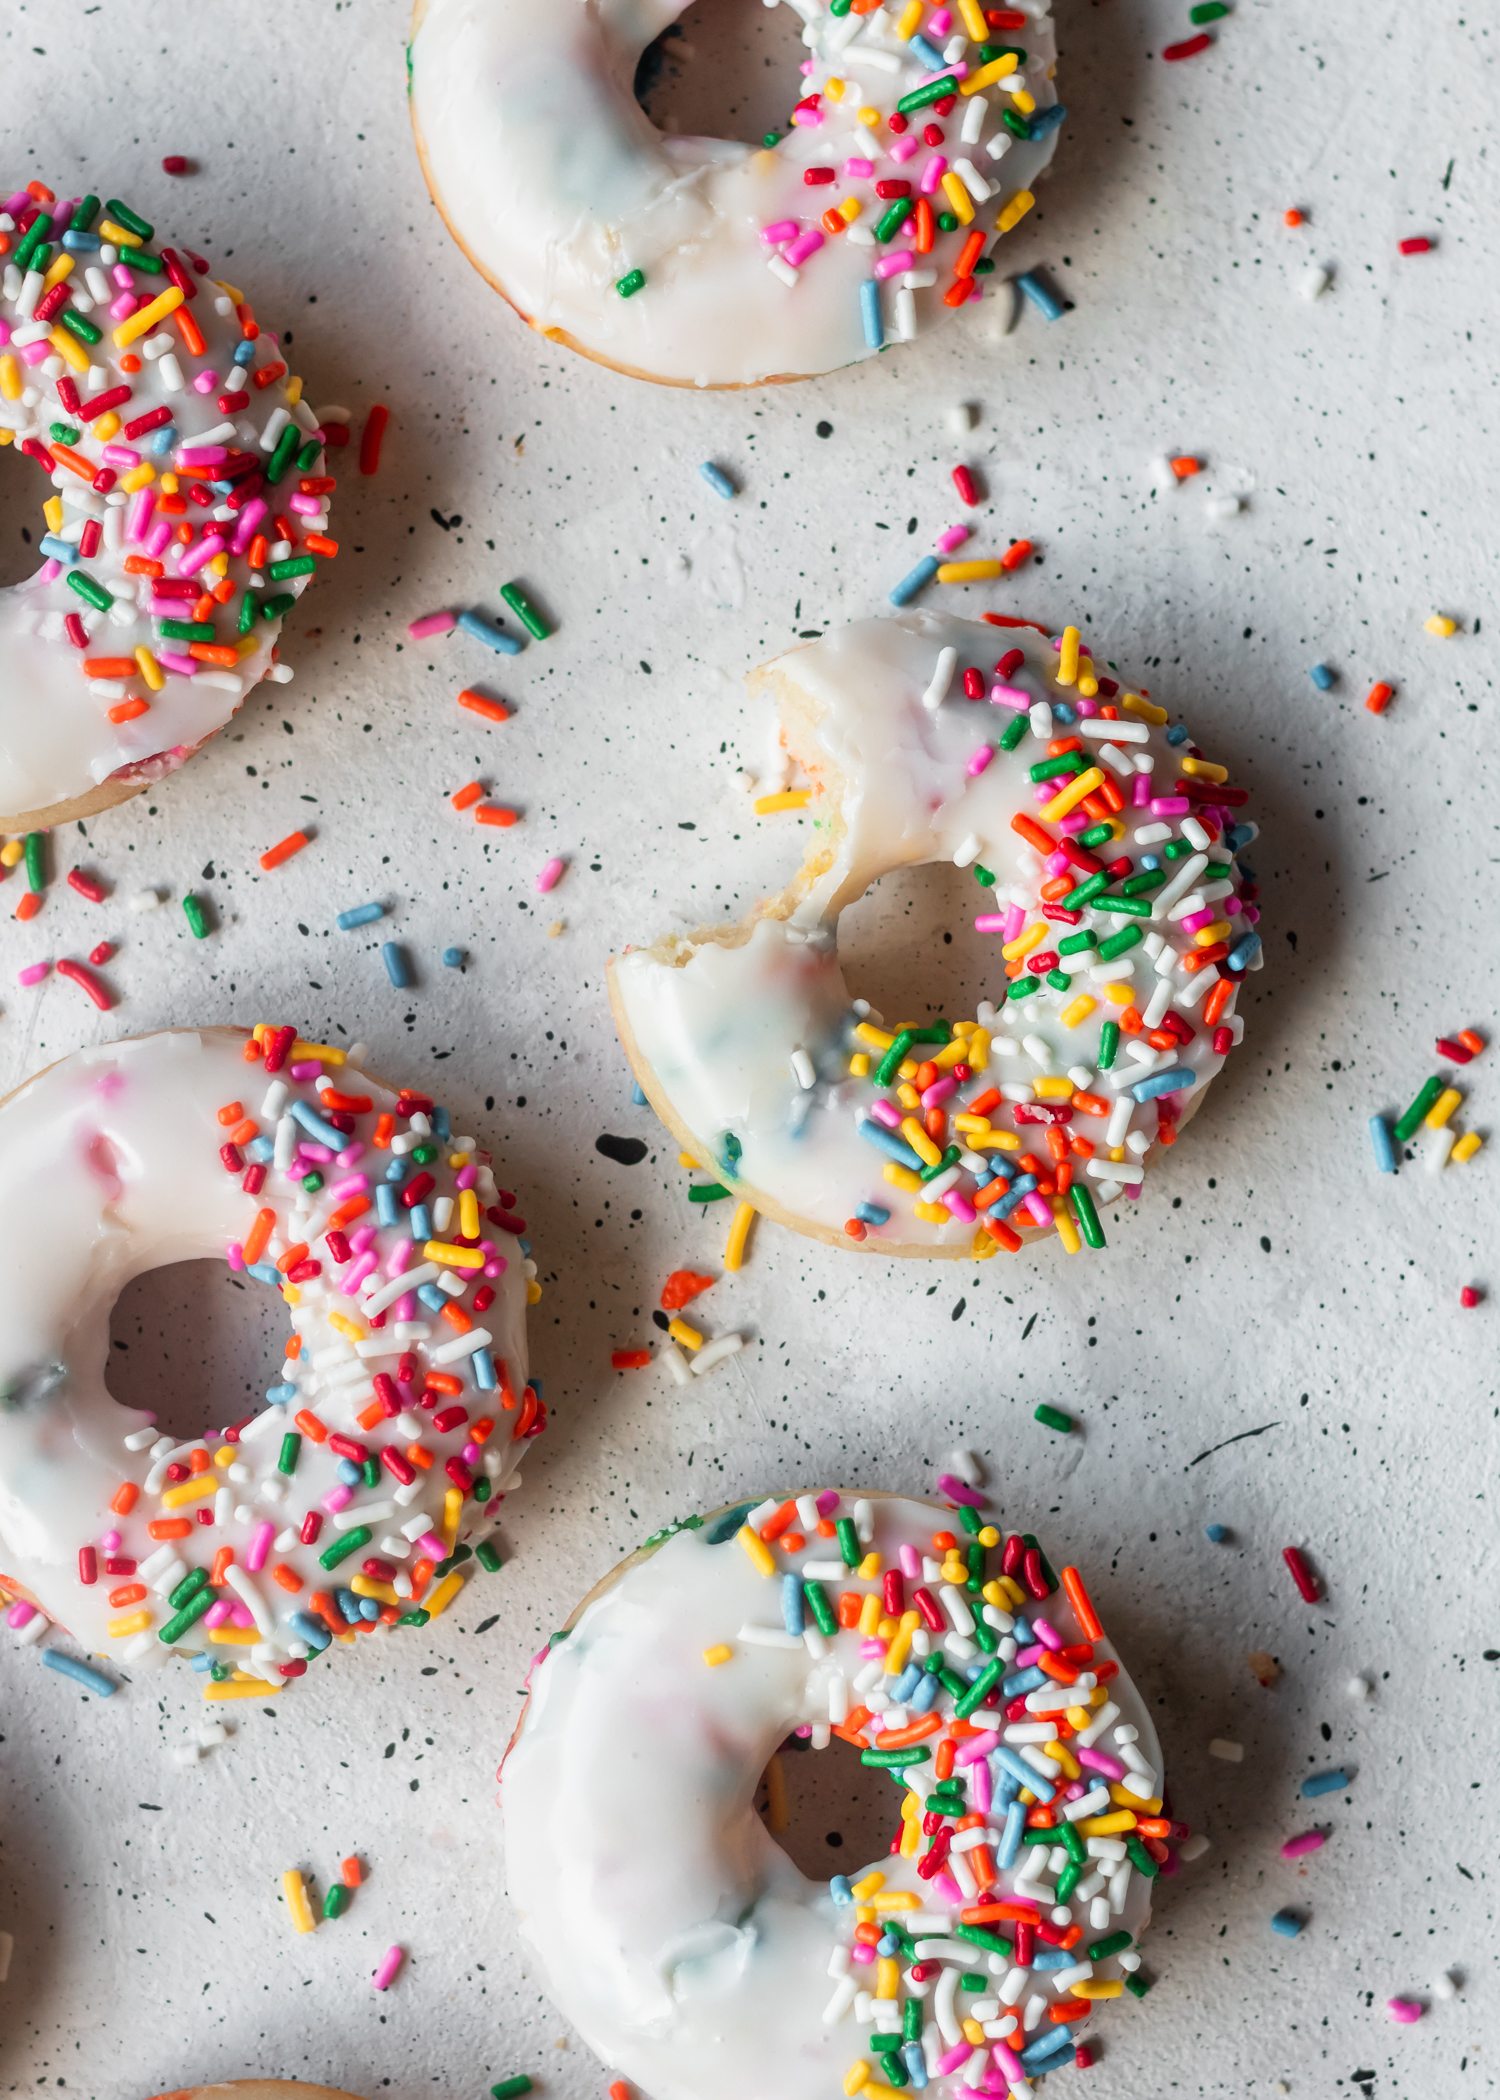 An overhead shot of a funfetti donut with a bite taken out, surrounded by other donuts on a white speckled background with rainbow sprinkles.